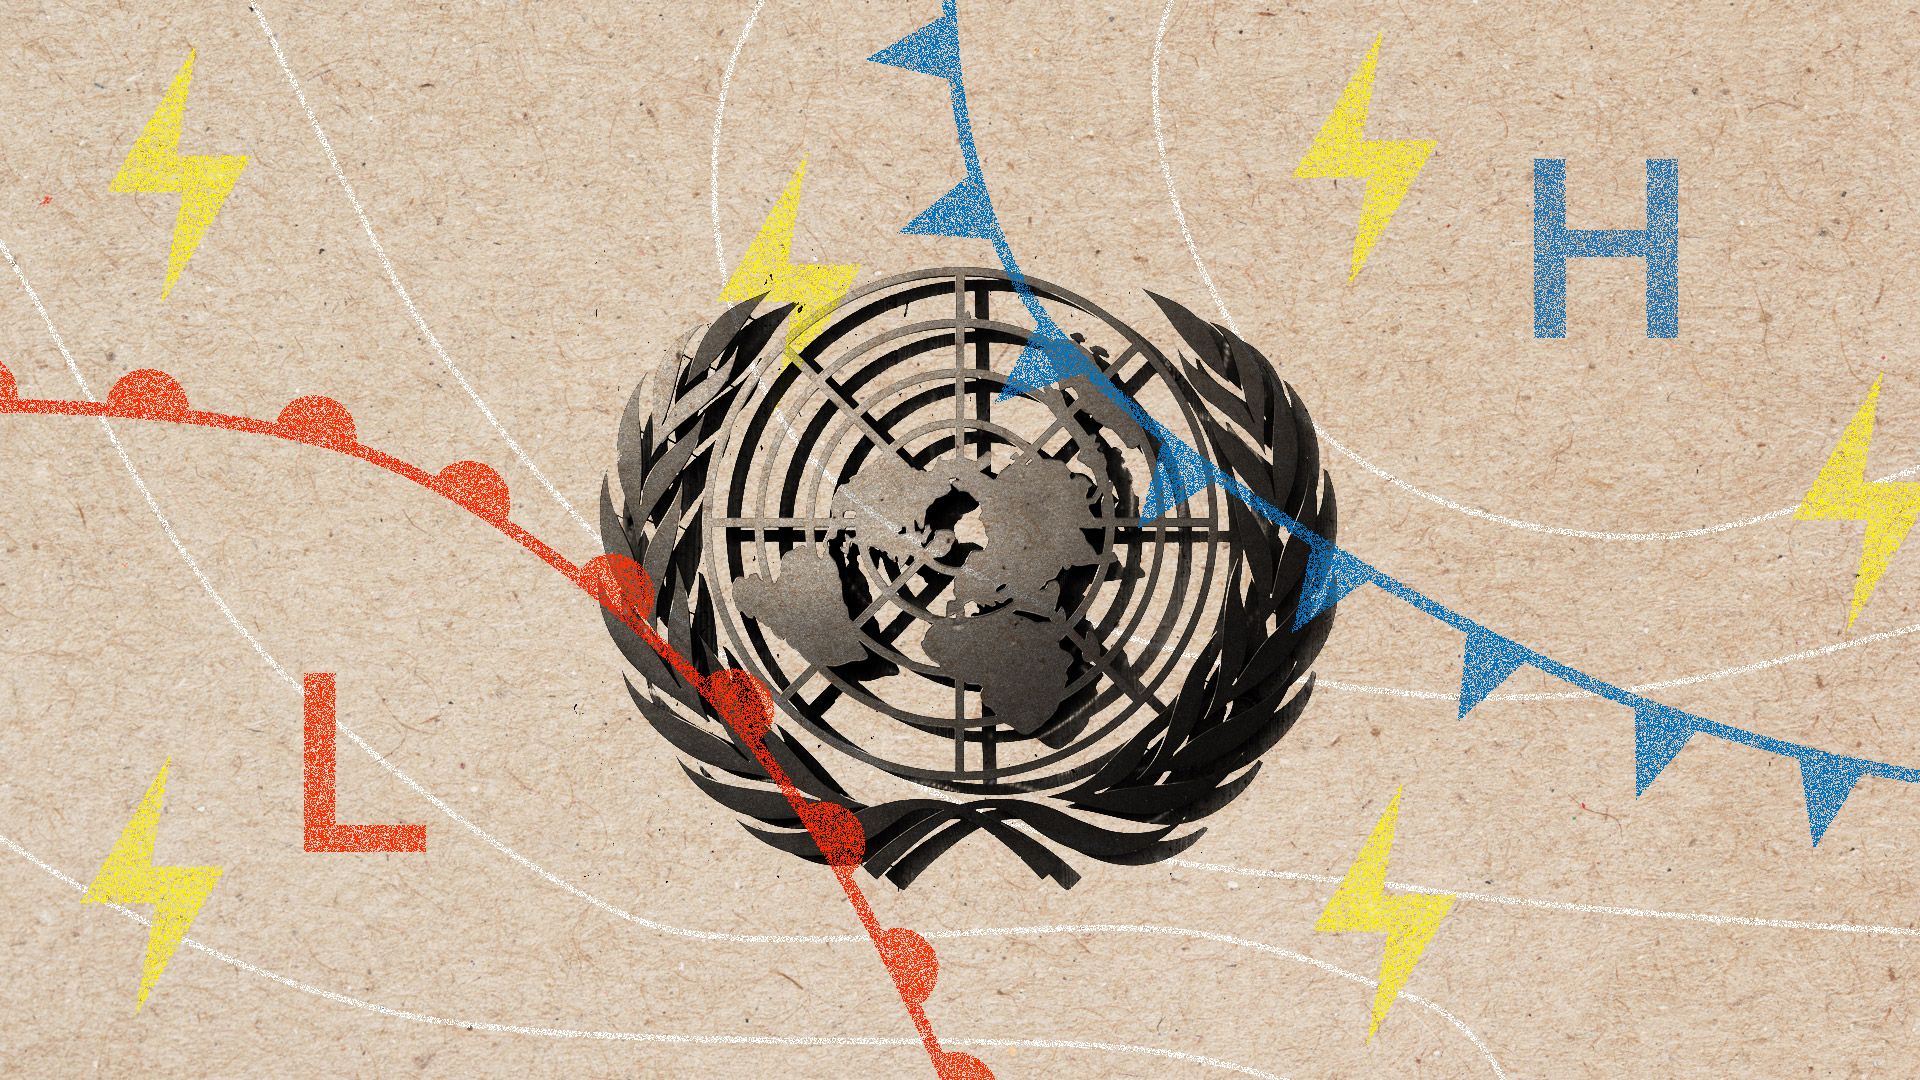 The United Nations seal being overtaken by meteorological symbols